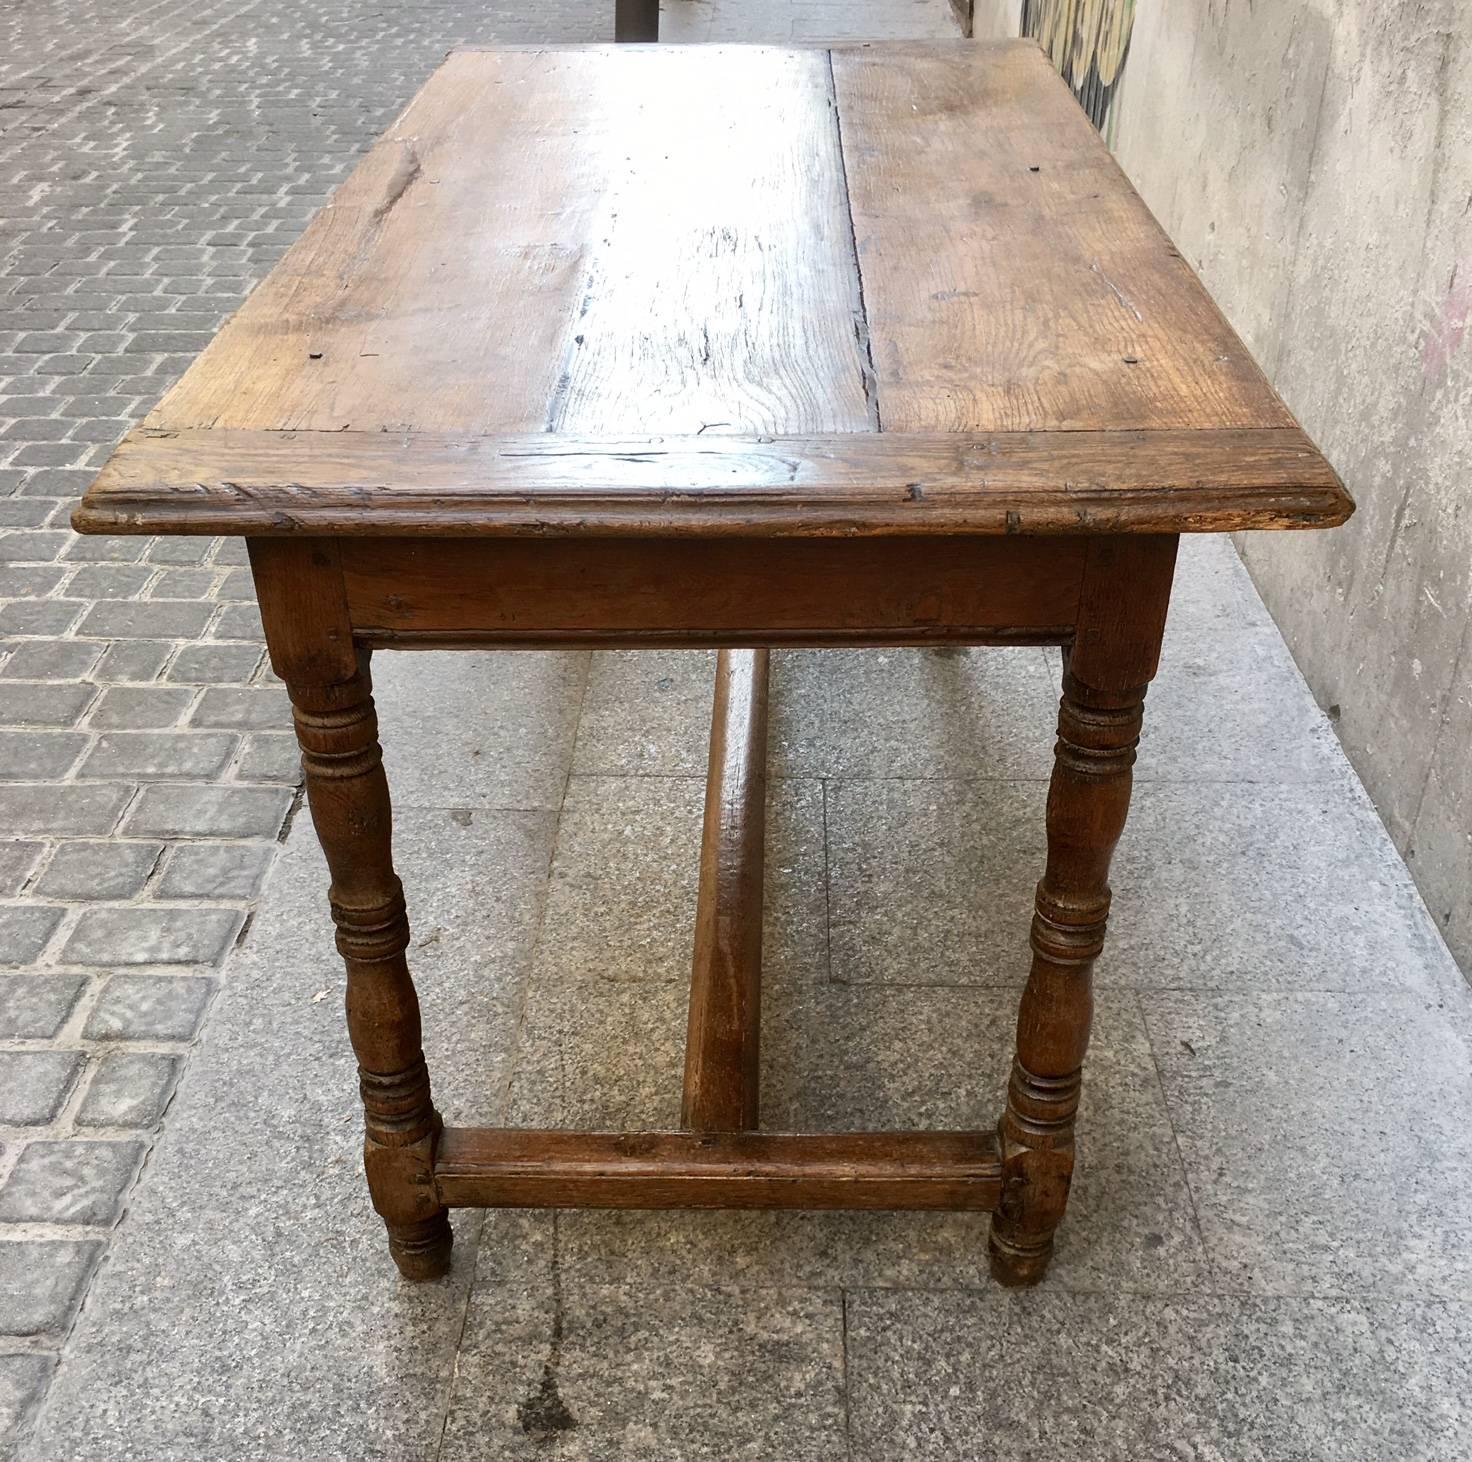 Rectangular oak 18th century country table with turned legs and a trestle base.